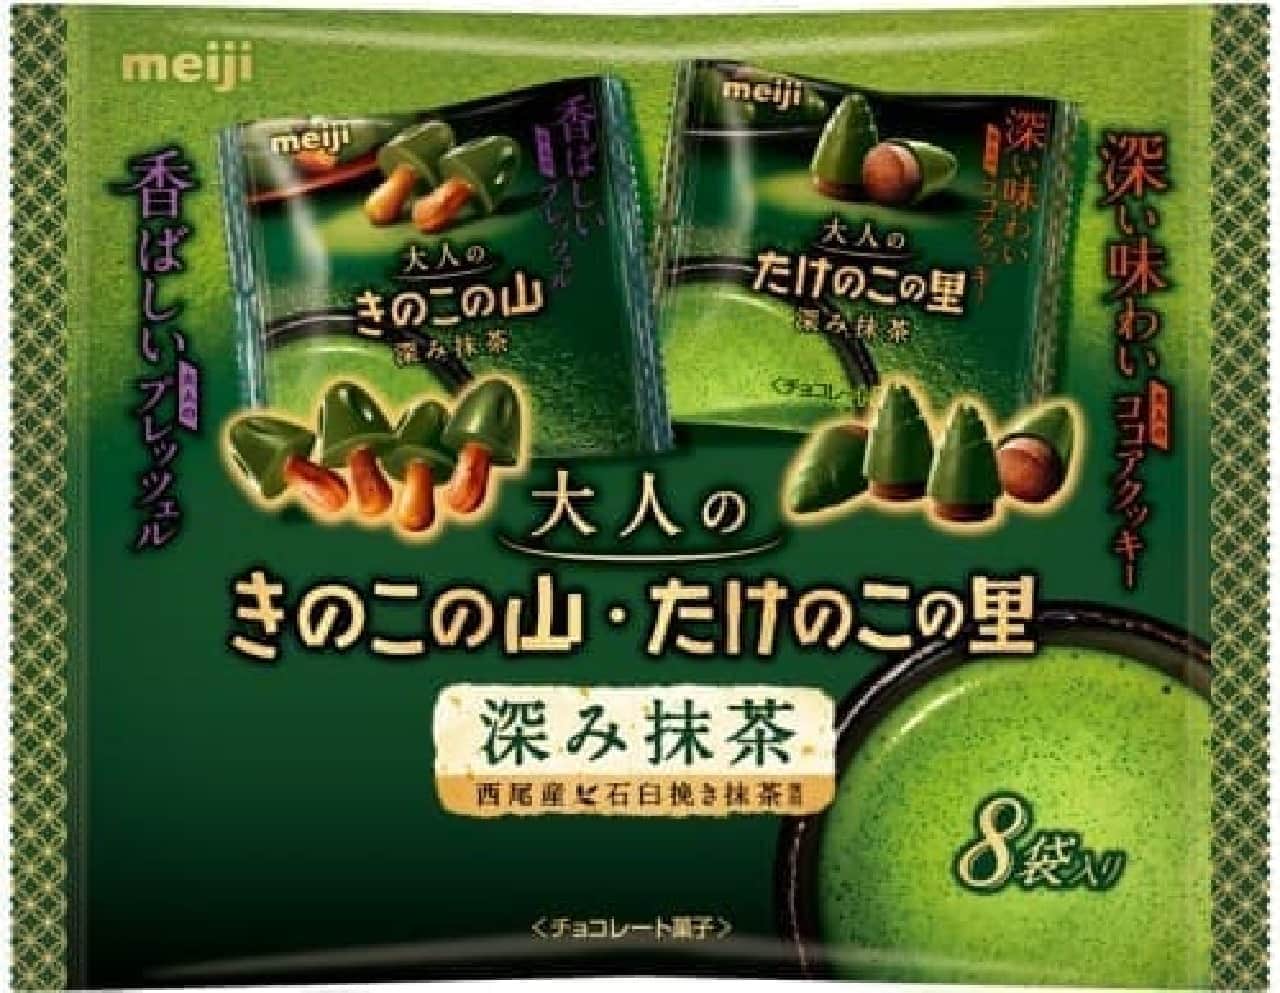 Matcha flavor only for now!